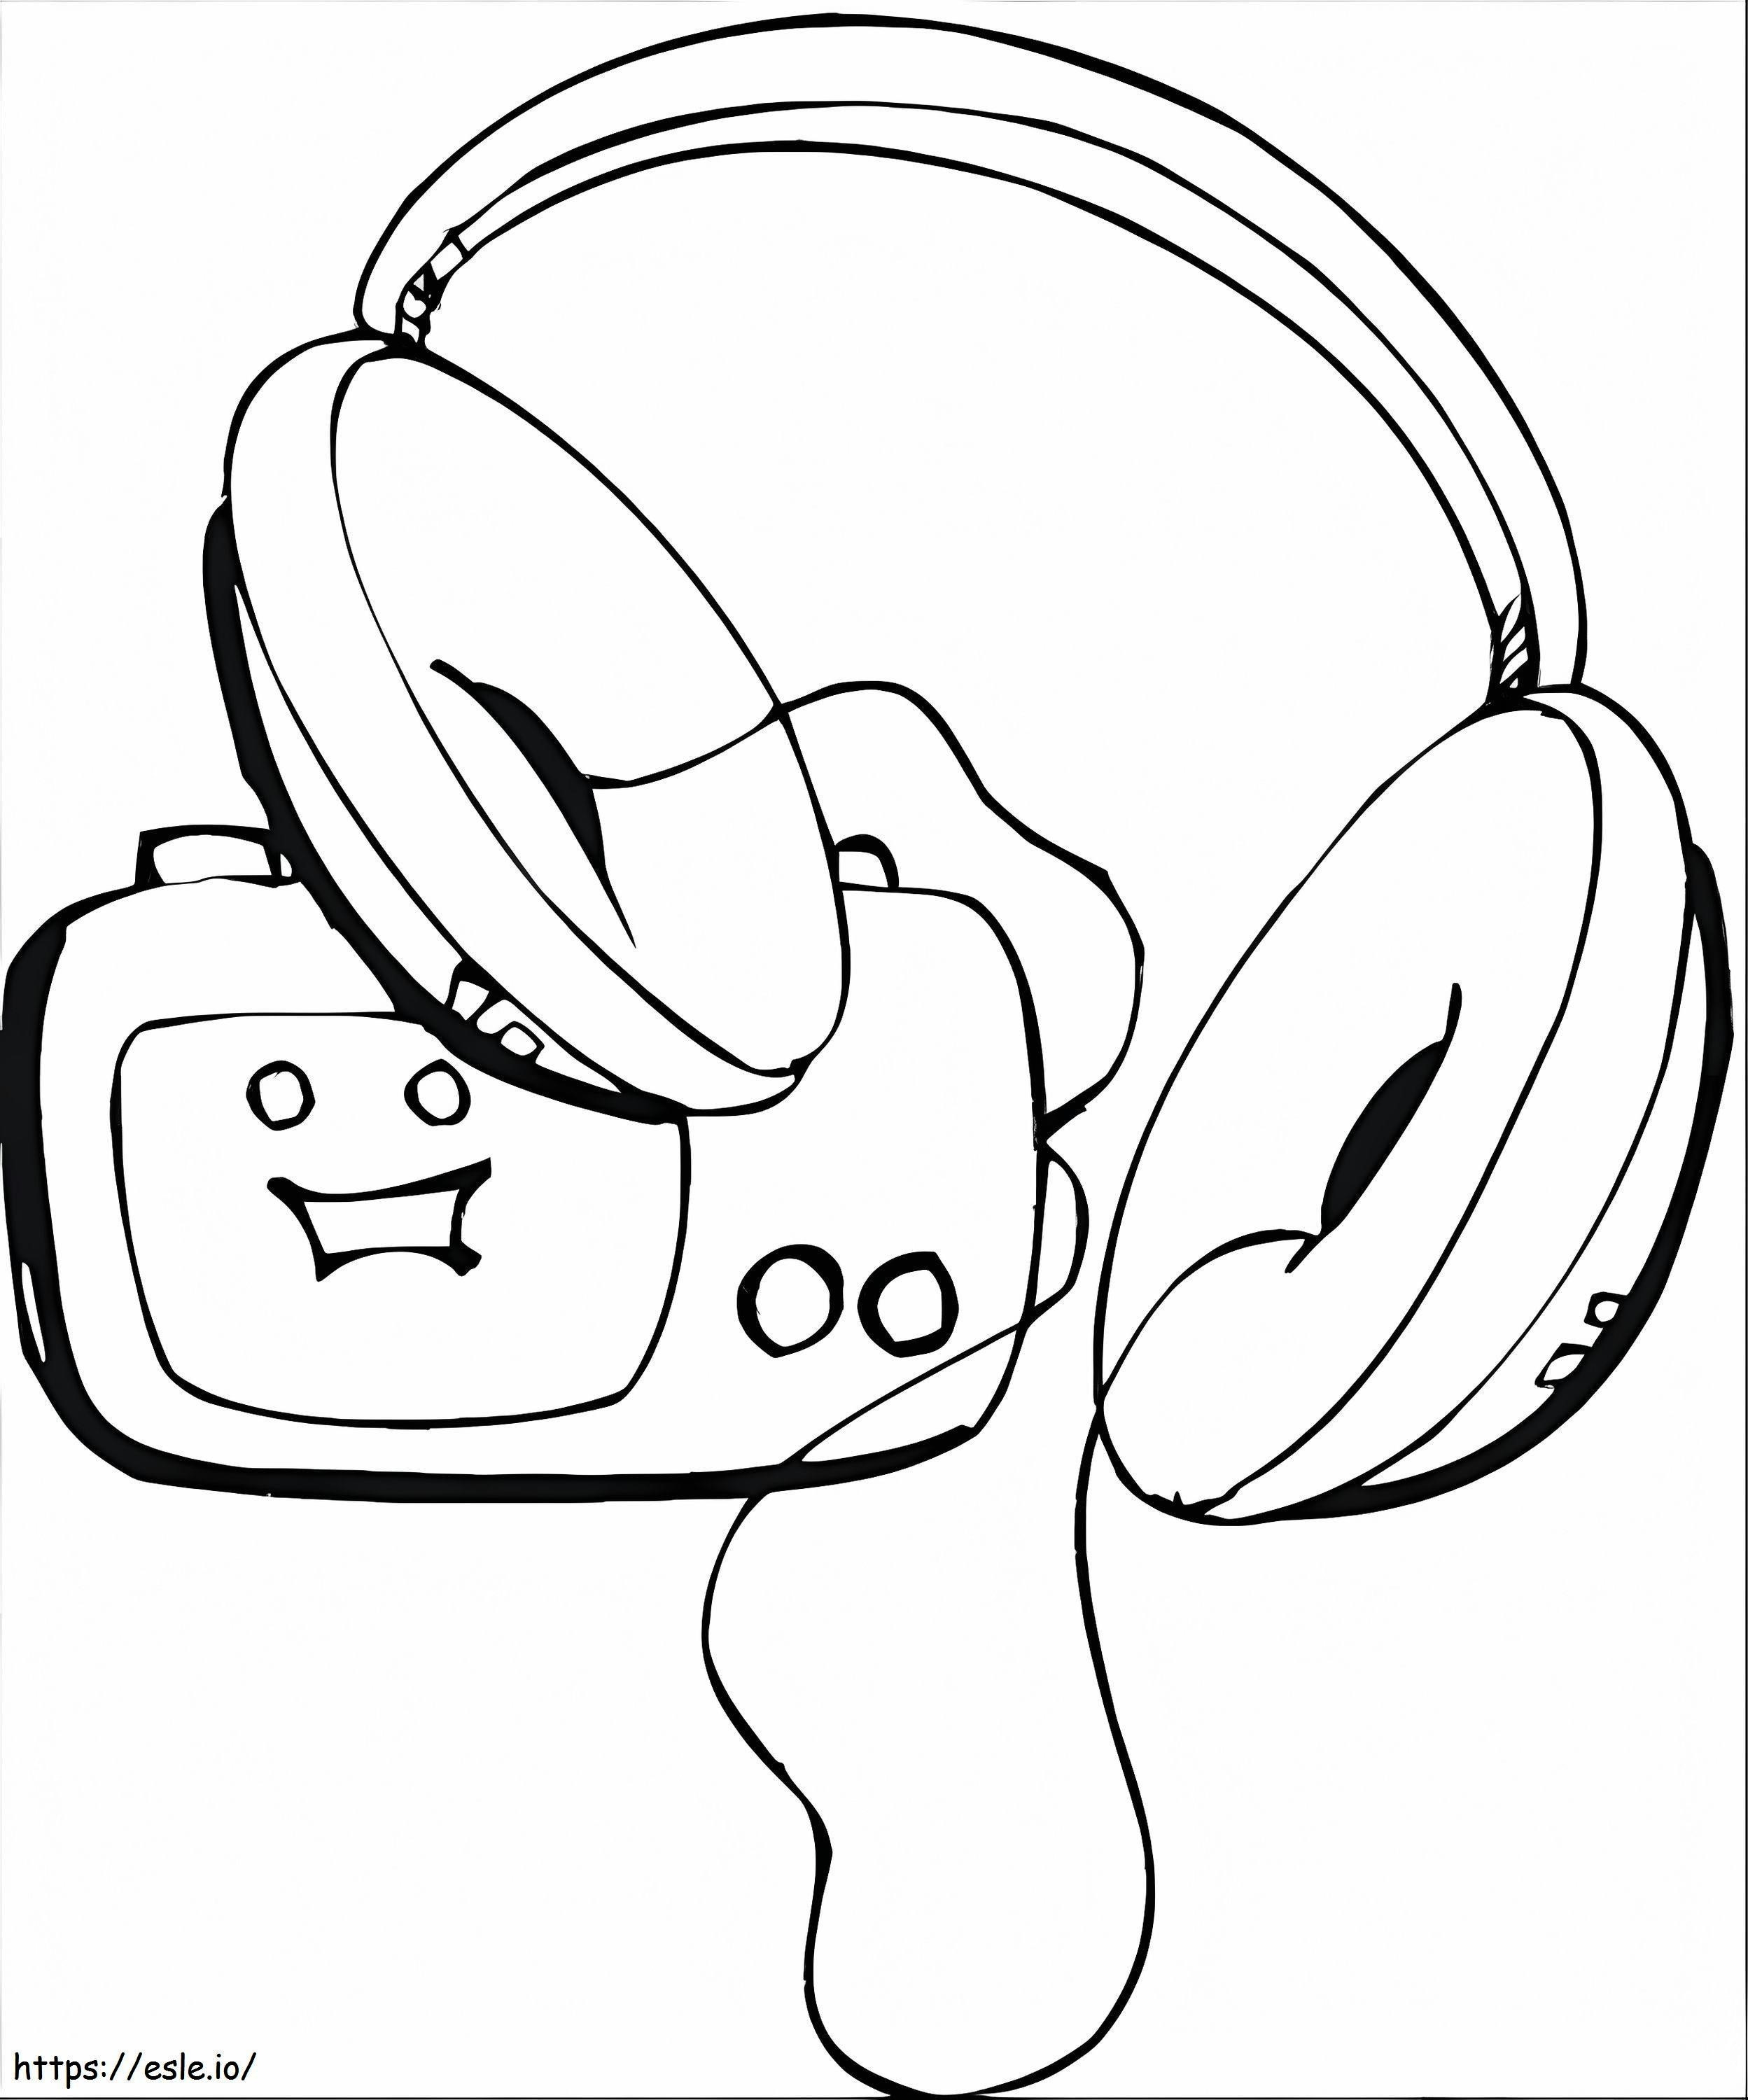 Loud Music On The Radio coloring page